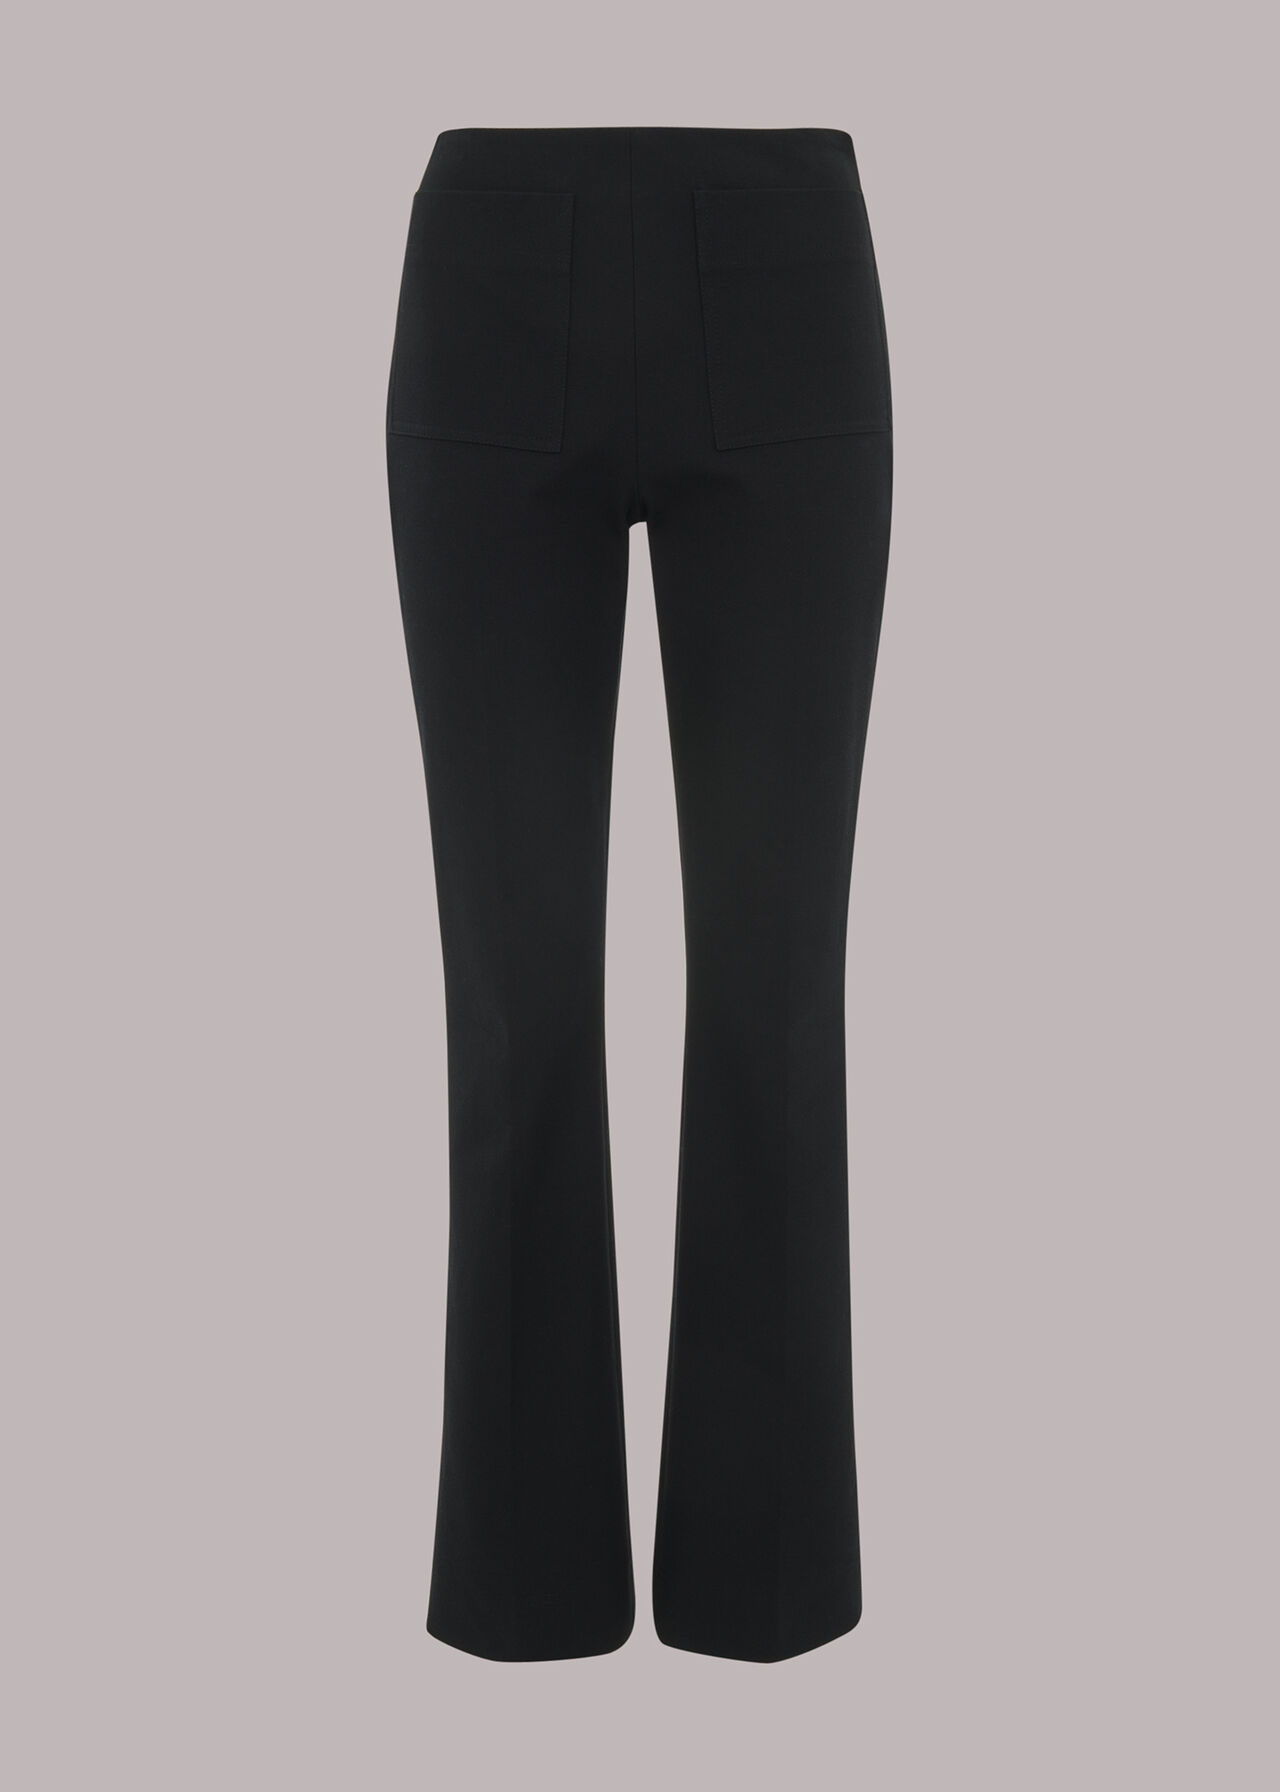 Black Lucy Kick Flare Trouser, WHISTLES